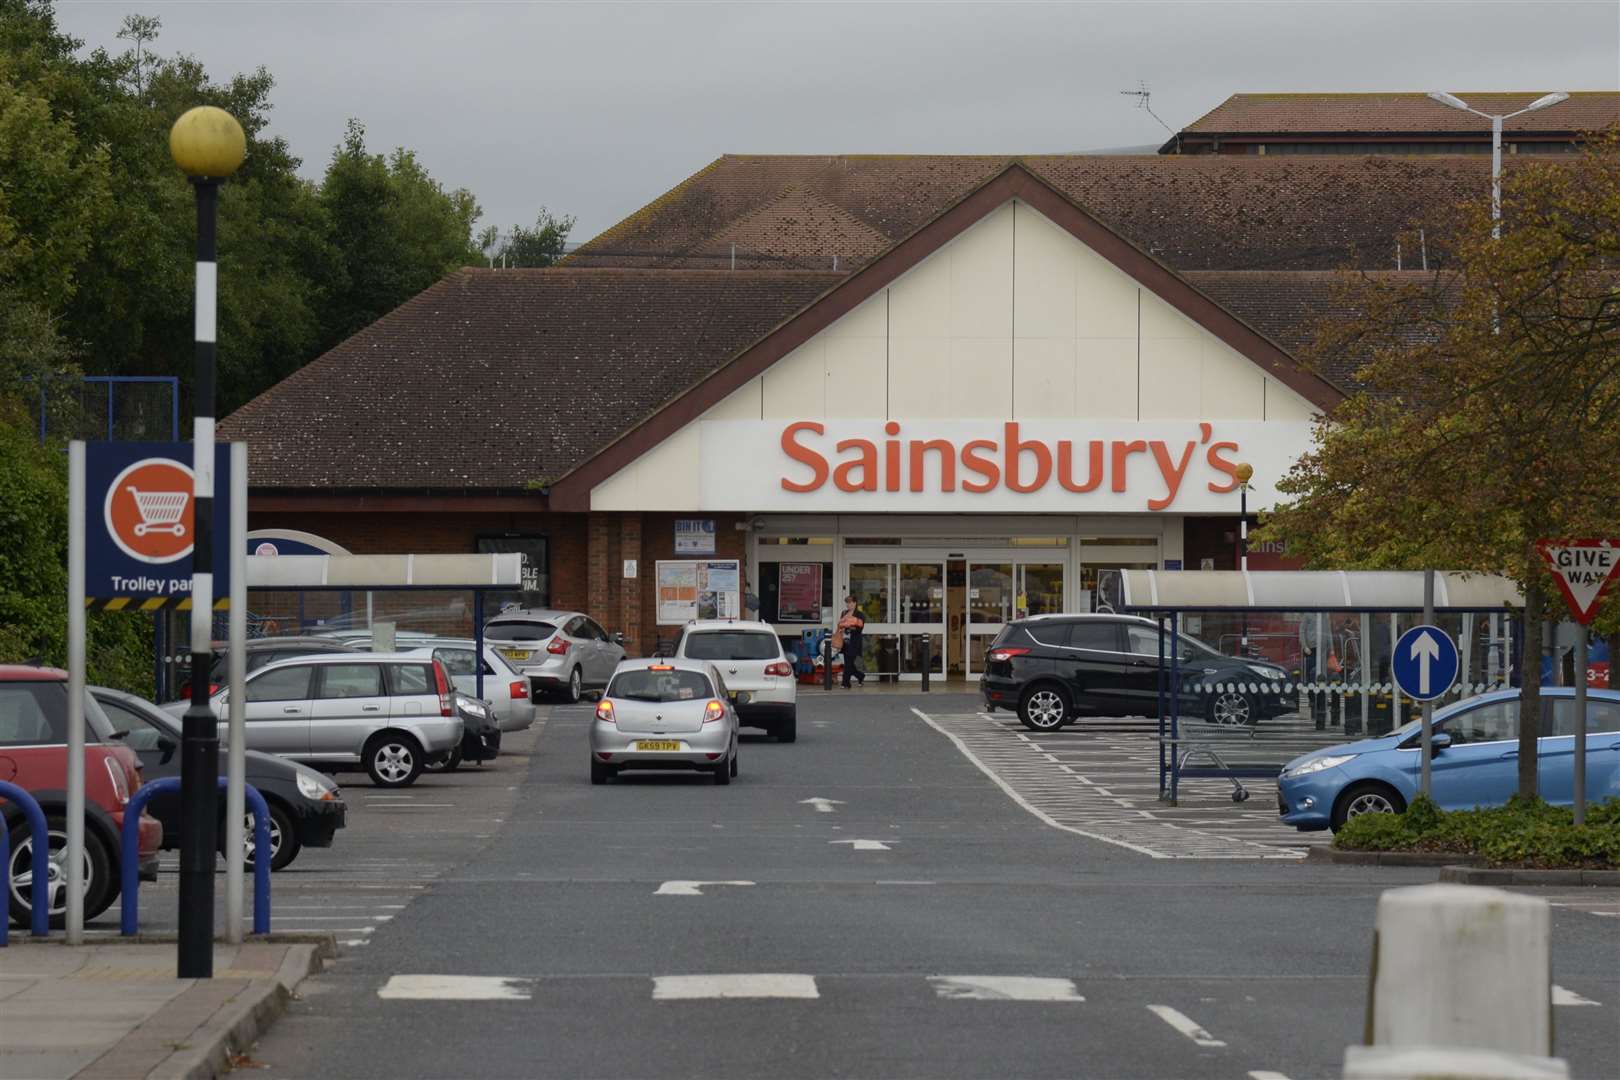 Shoppers at the Chestfield Sainsbury's store (pictured) were "upset" a two minute silence was interrupted by a tannoy announcement. Picture: Chris Davey